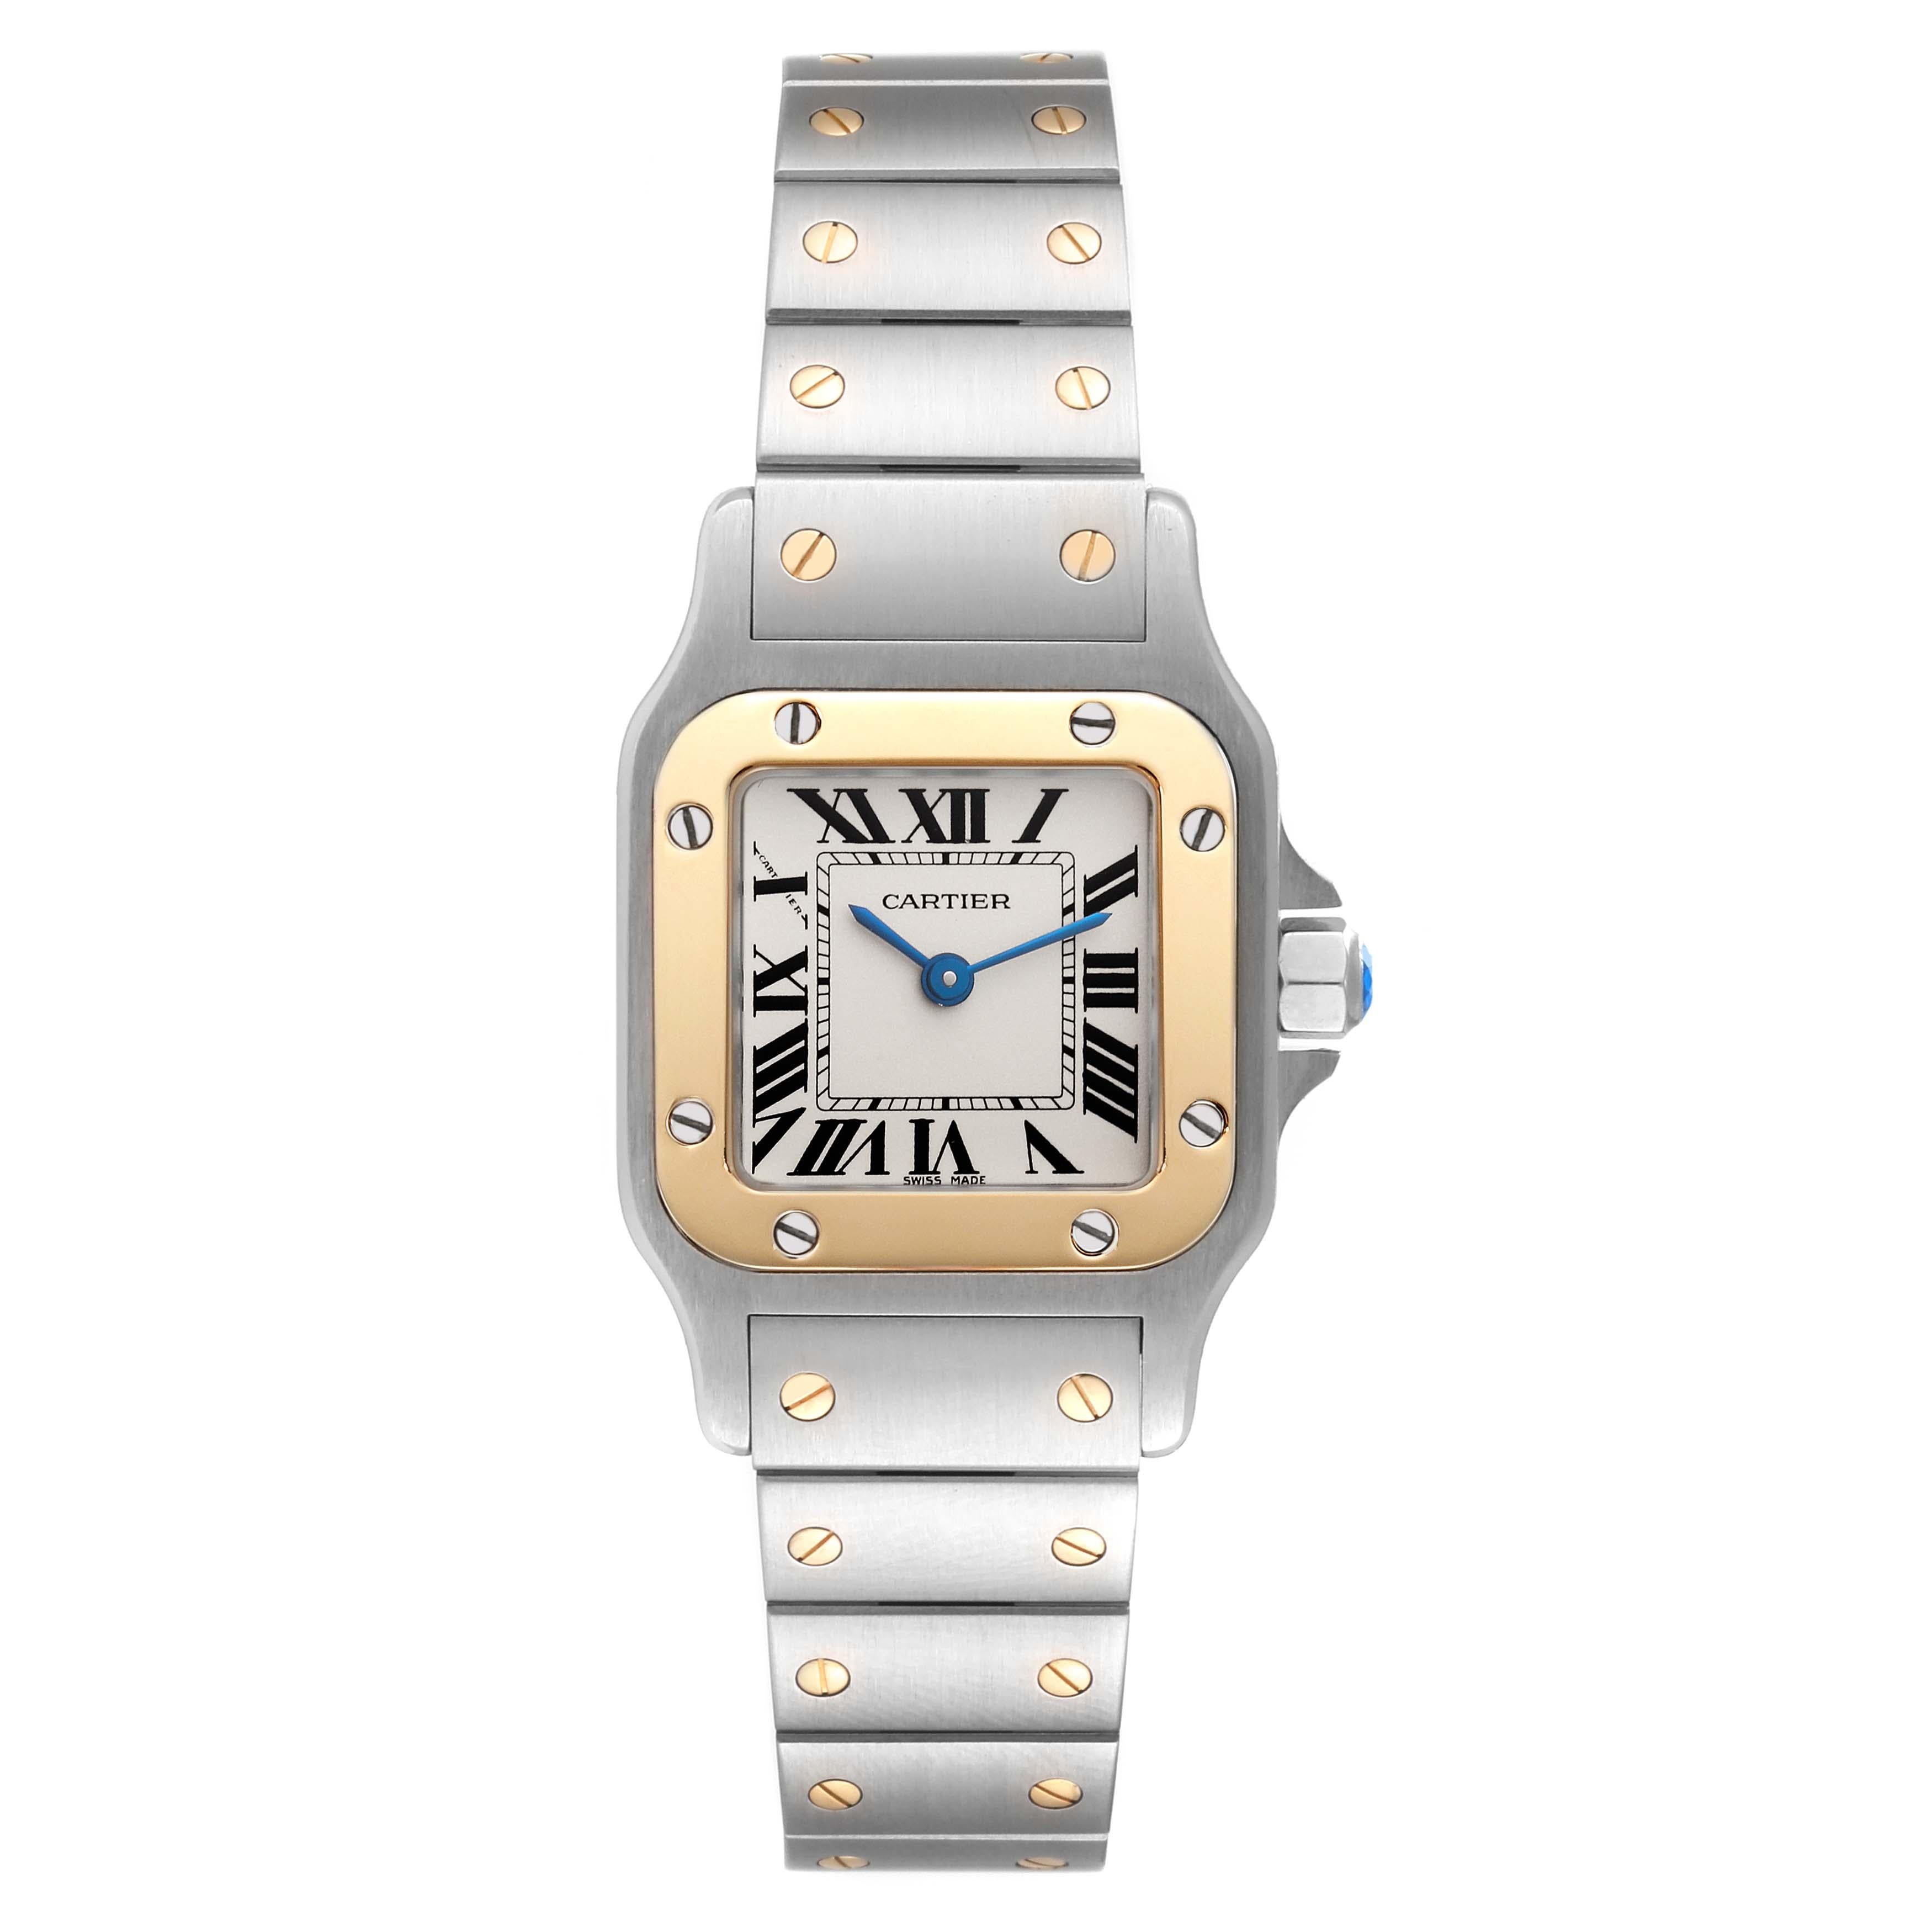 Cartier Santos Galbee Small Steel Yellow Gold Ladies Watch W20012C4. Quartz movement. Stainless steel case 24.0 x 34.7 mm. Steel octagonal crown set with a faceted blue spinel. 18K yellow gold bezel punctuated with 8 signature screws. Scratch